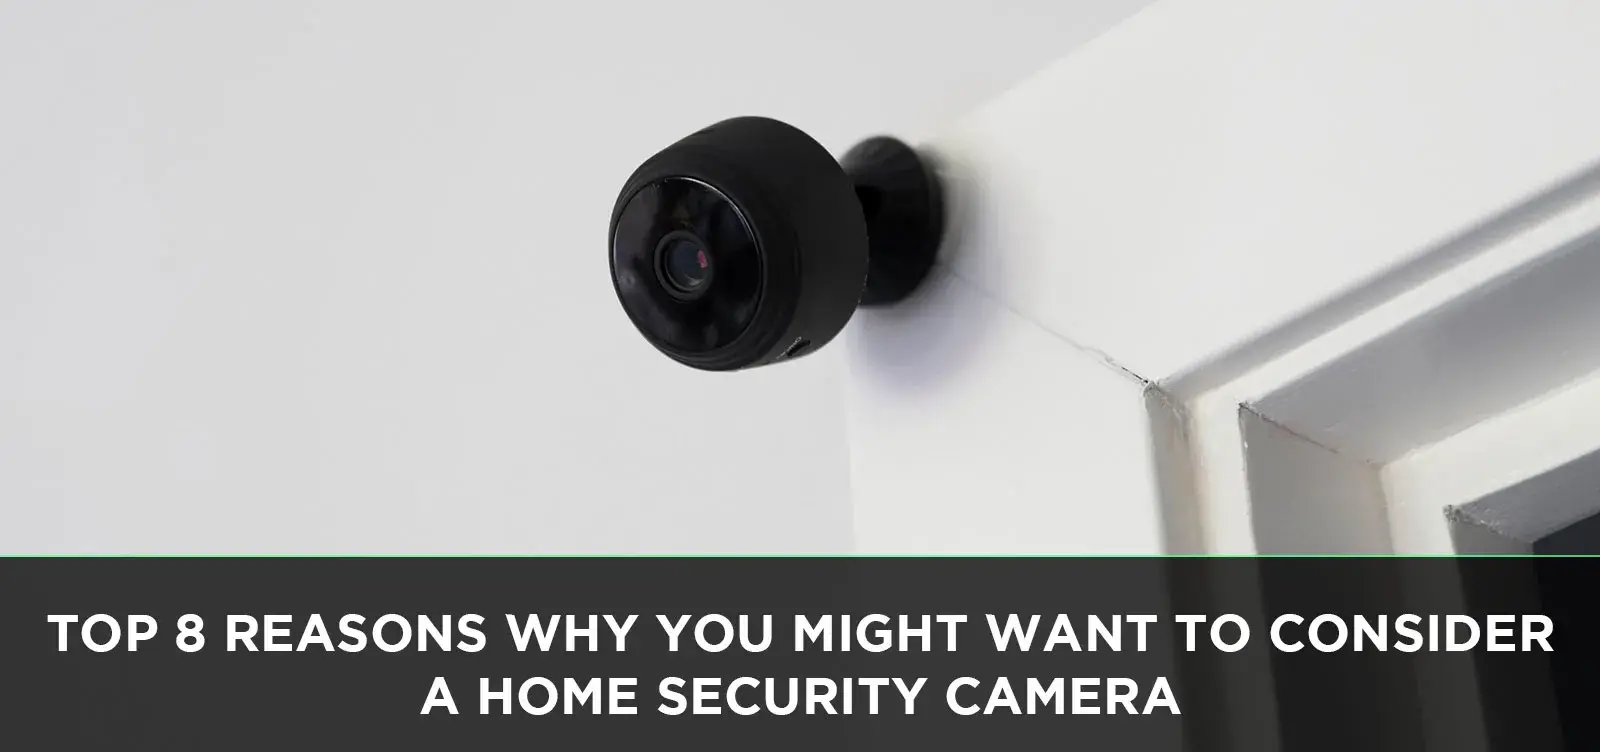 Top-8-Reasons-Why-You-Might-Want-to-Consider-a-Home-Security-Camera